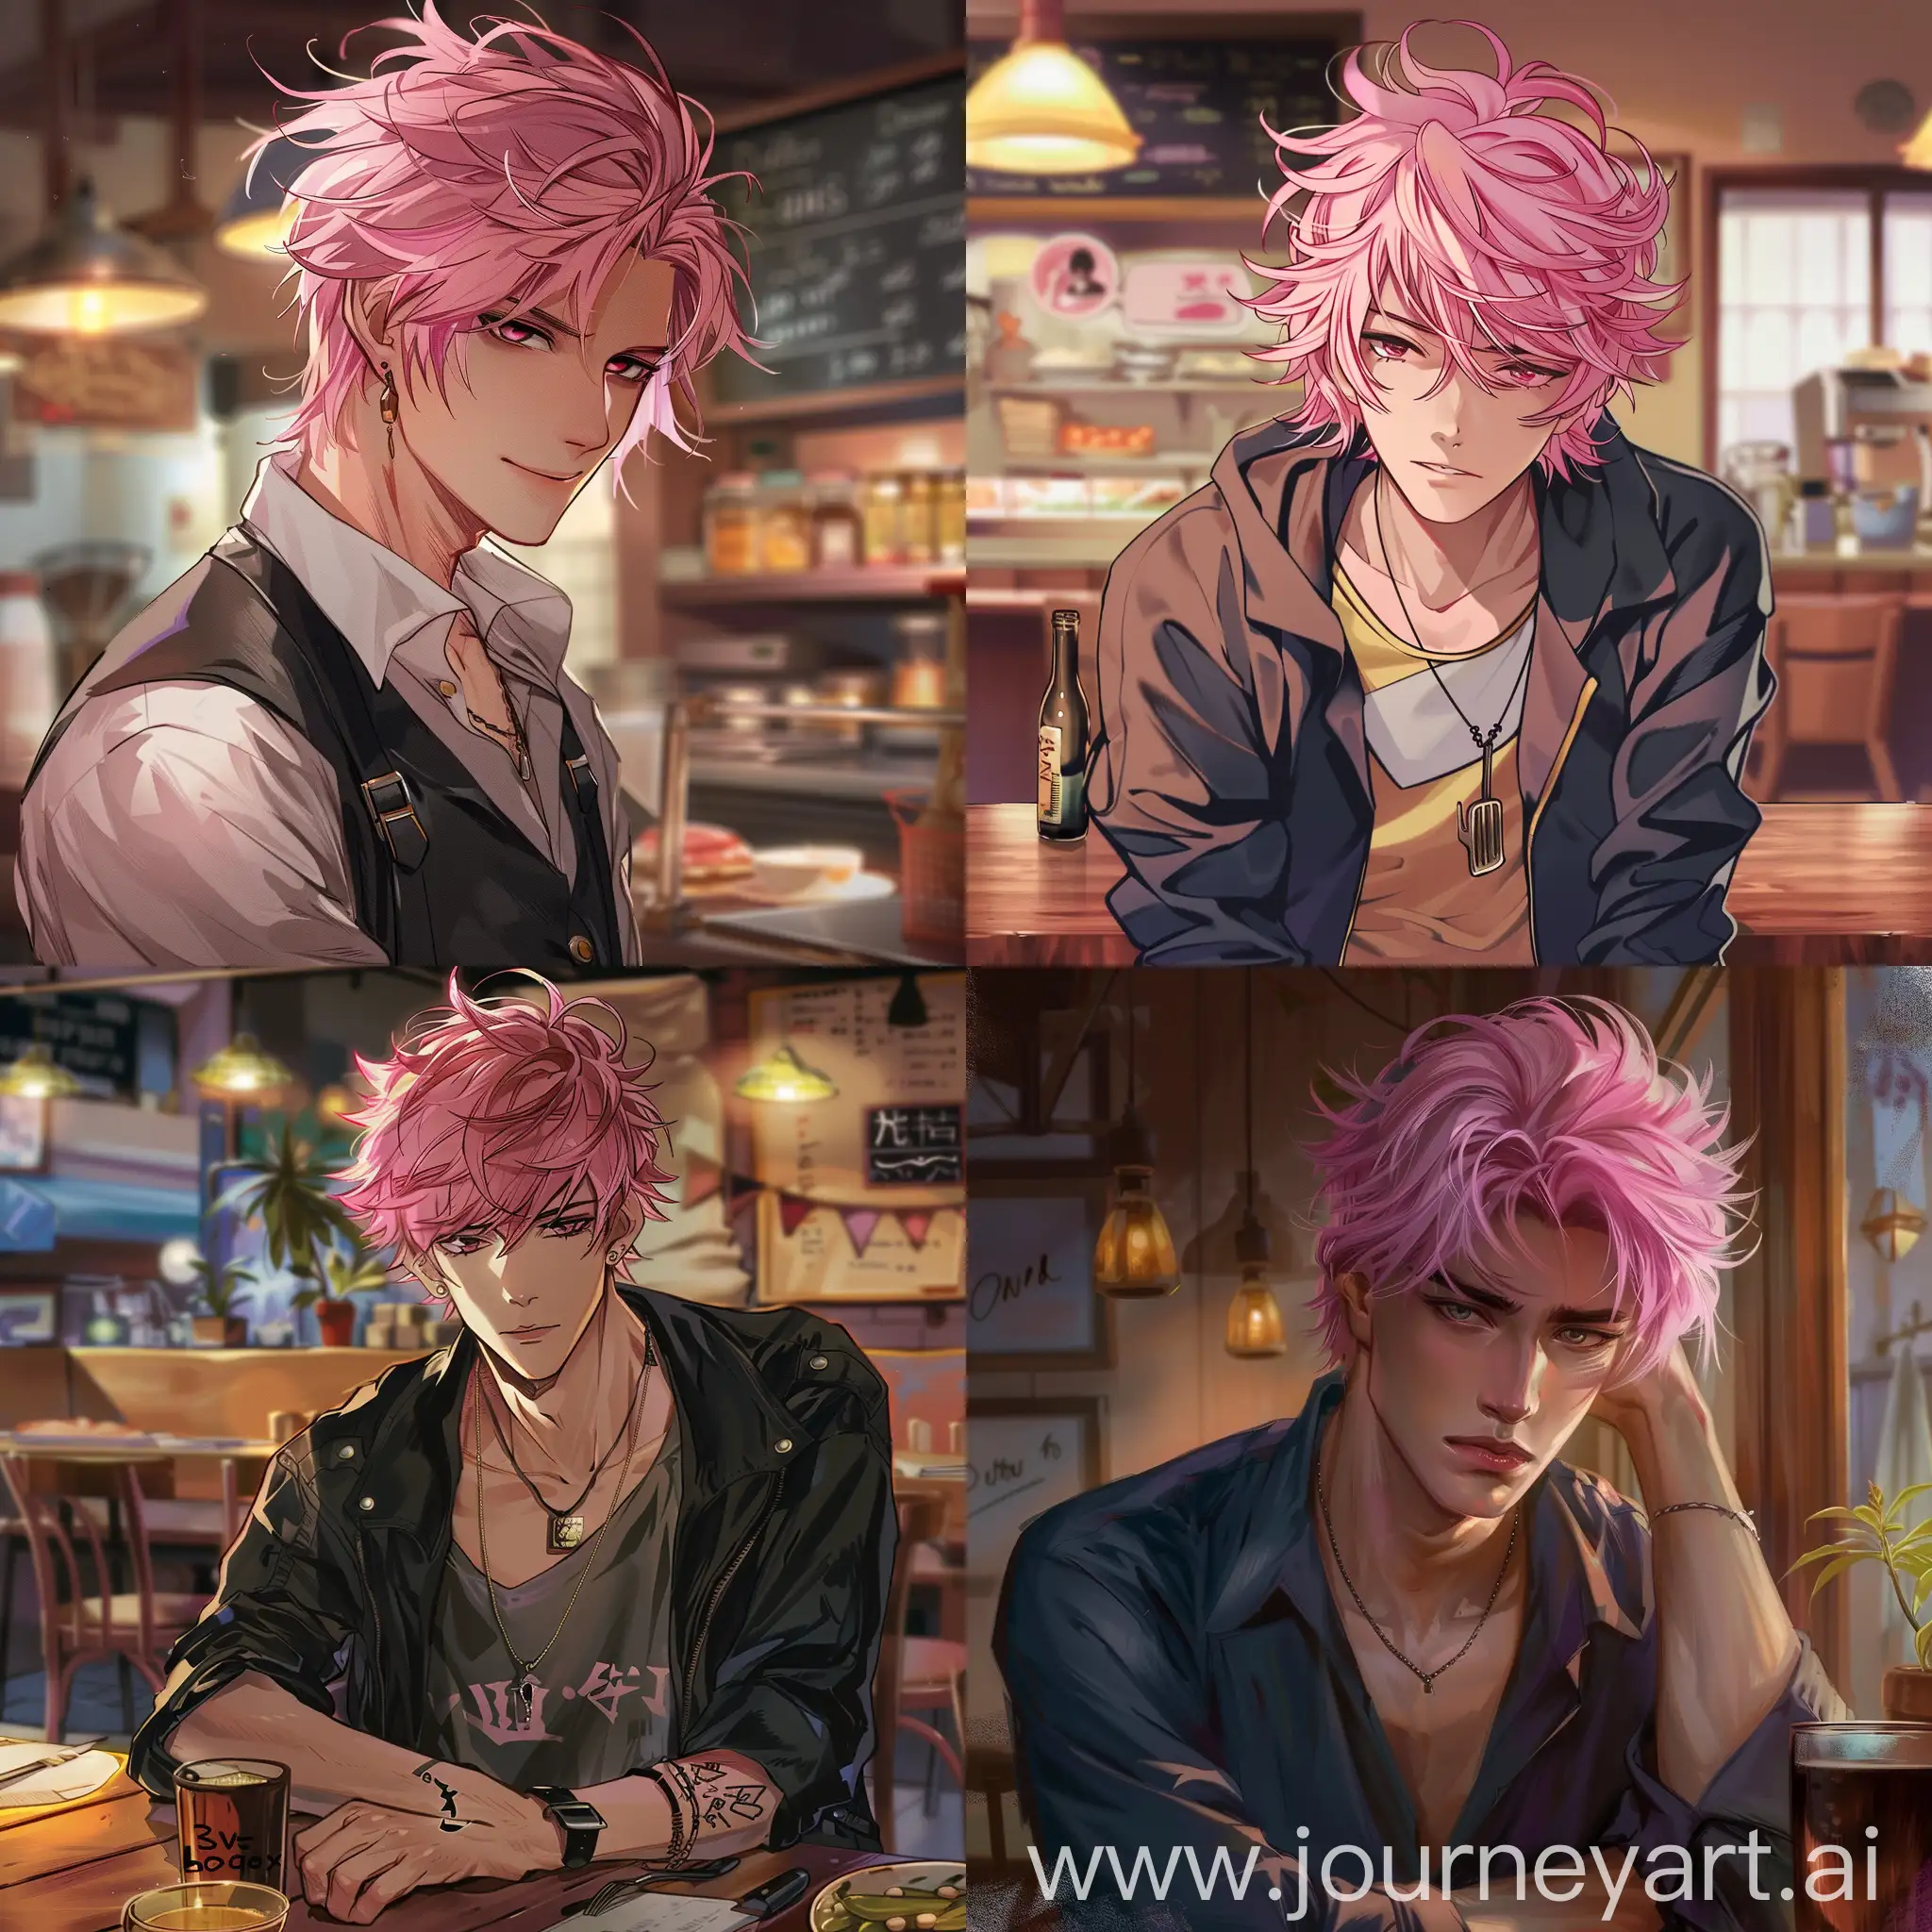 Handsome-PinkHaired-Manga-Male-in-Restaurant-Setting